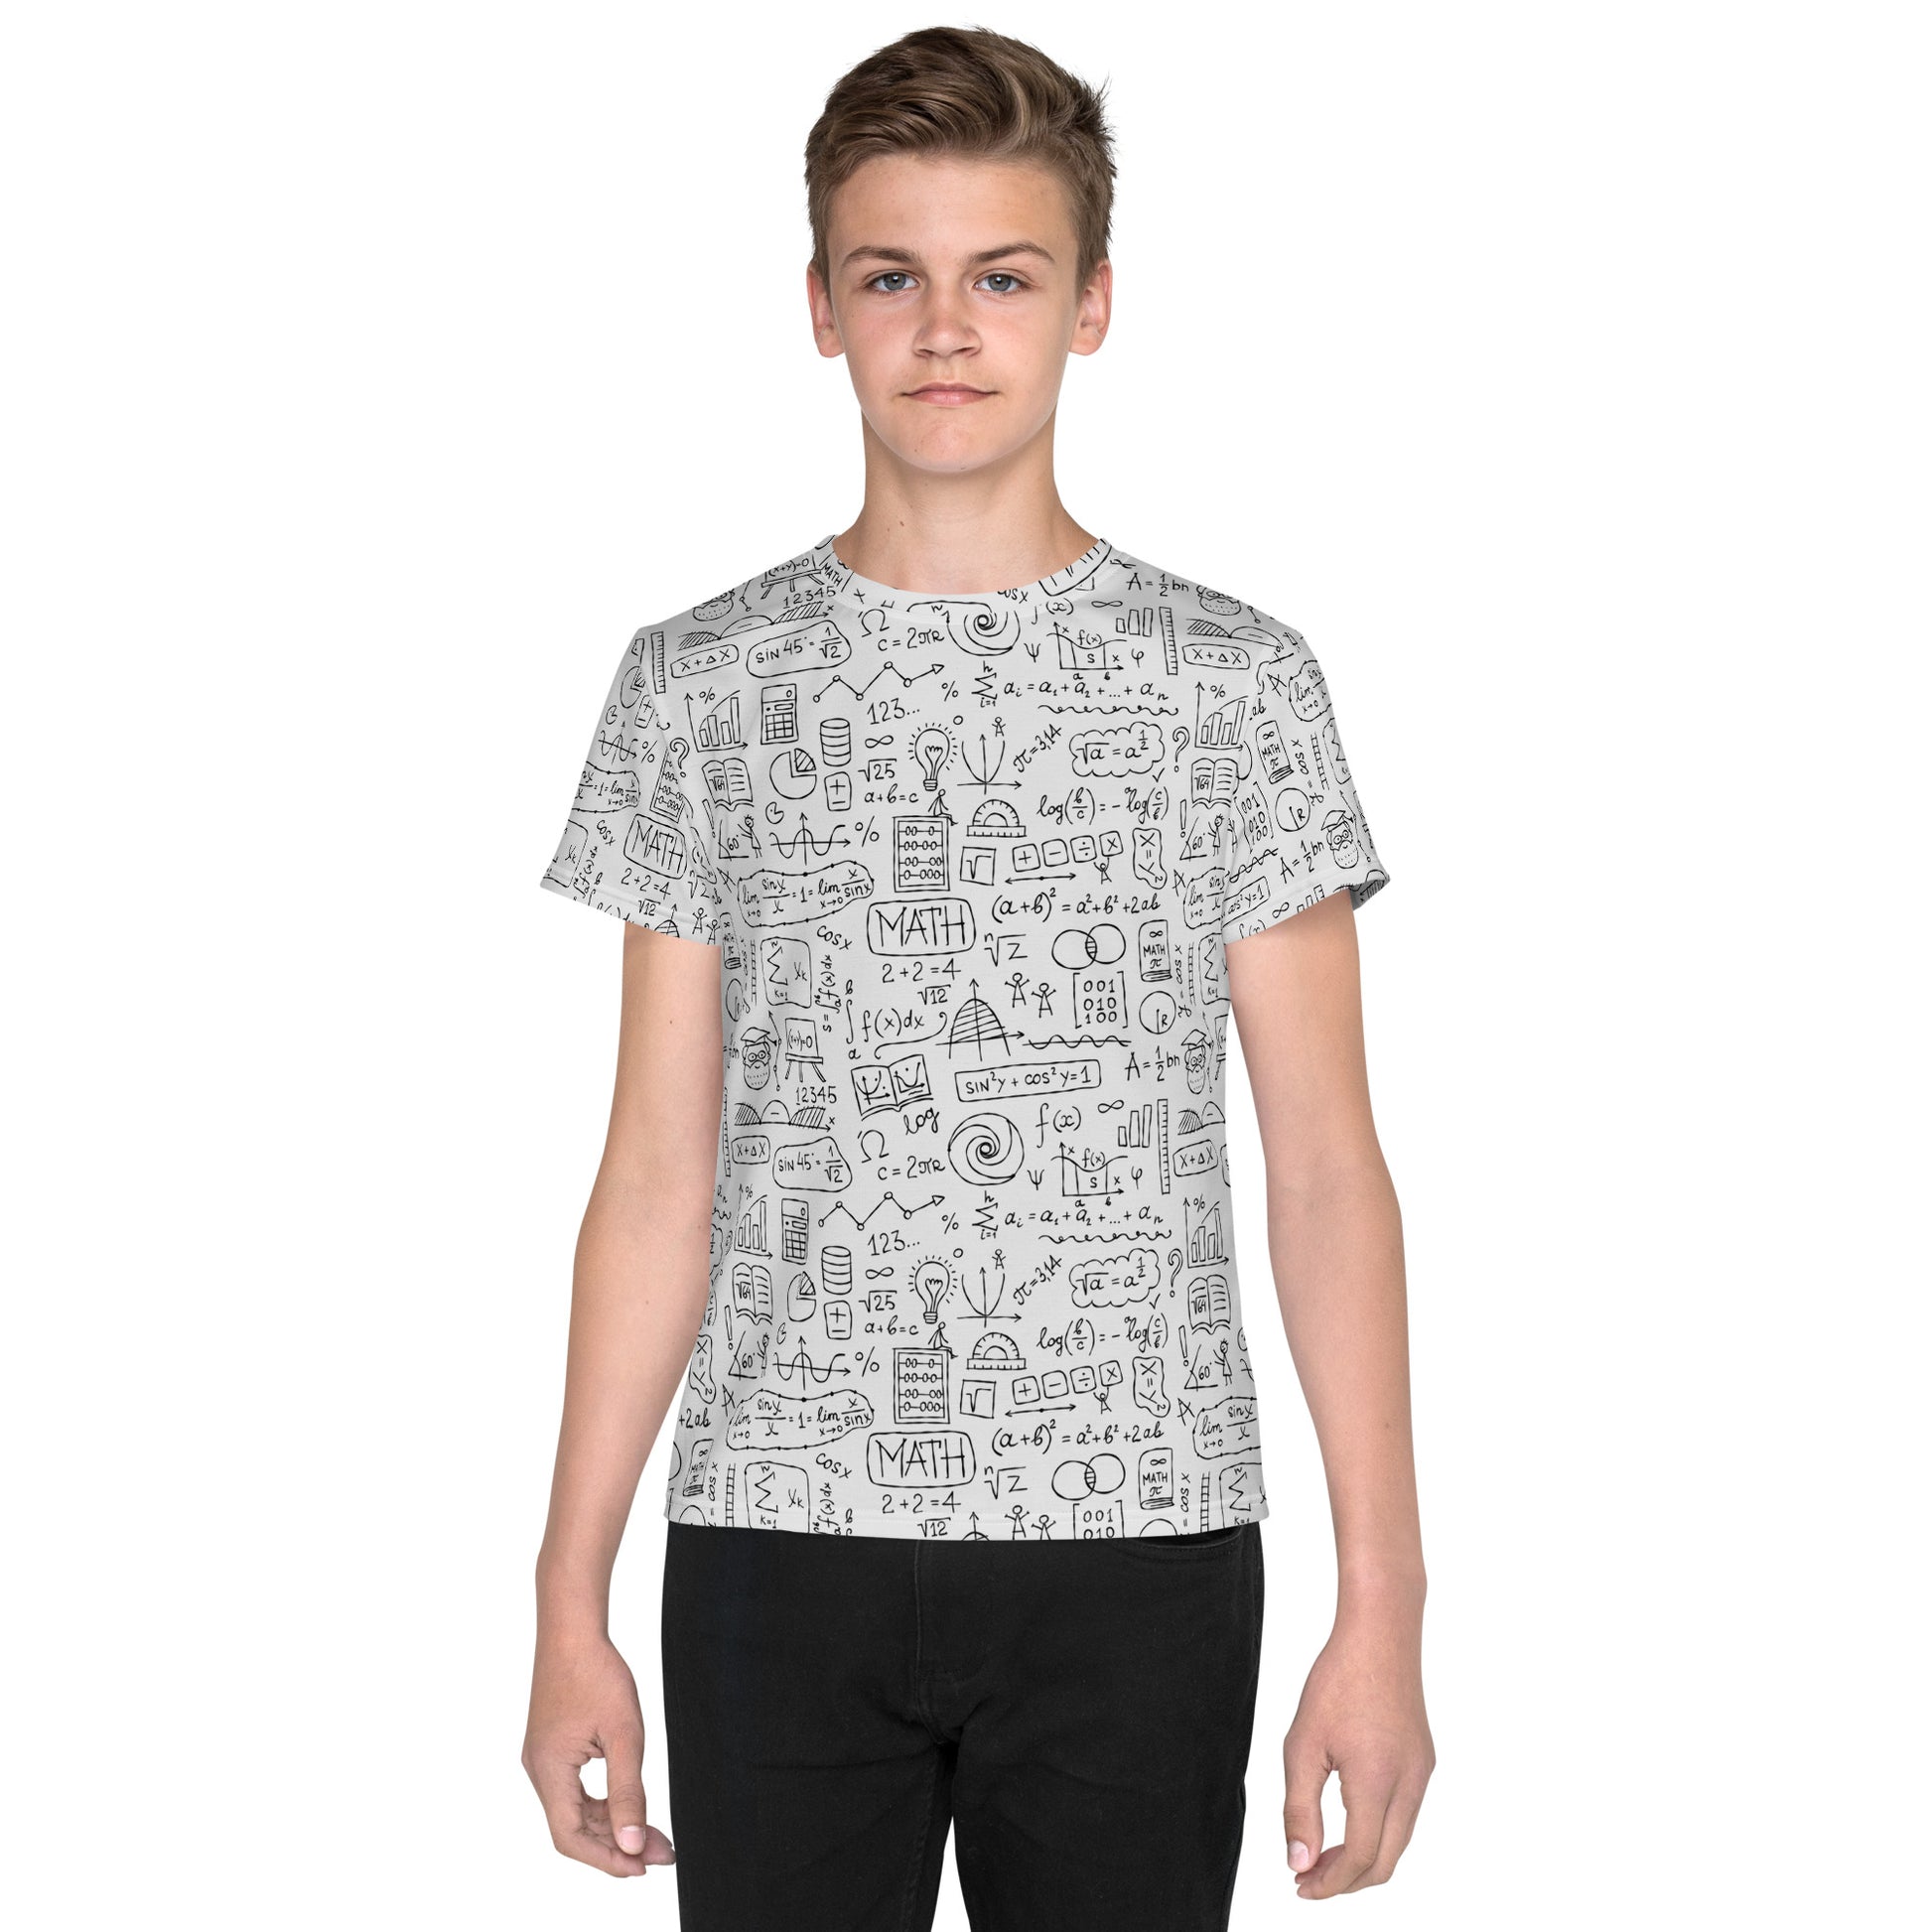 Boy wearing t-shirt light grey color with all-over math print featuring algebra and calculus symbols and equations. Front view